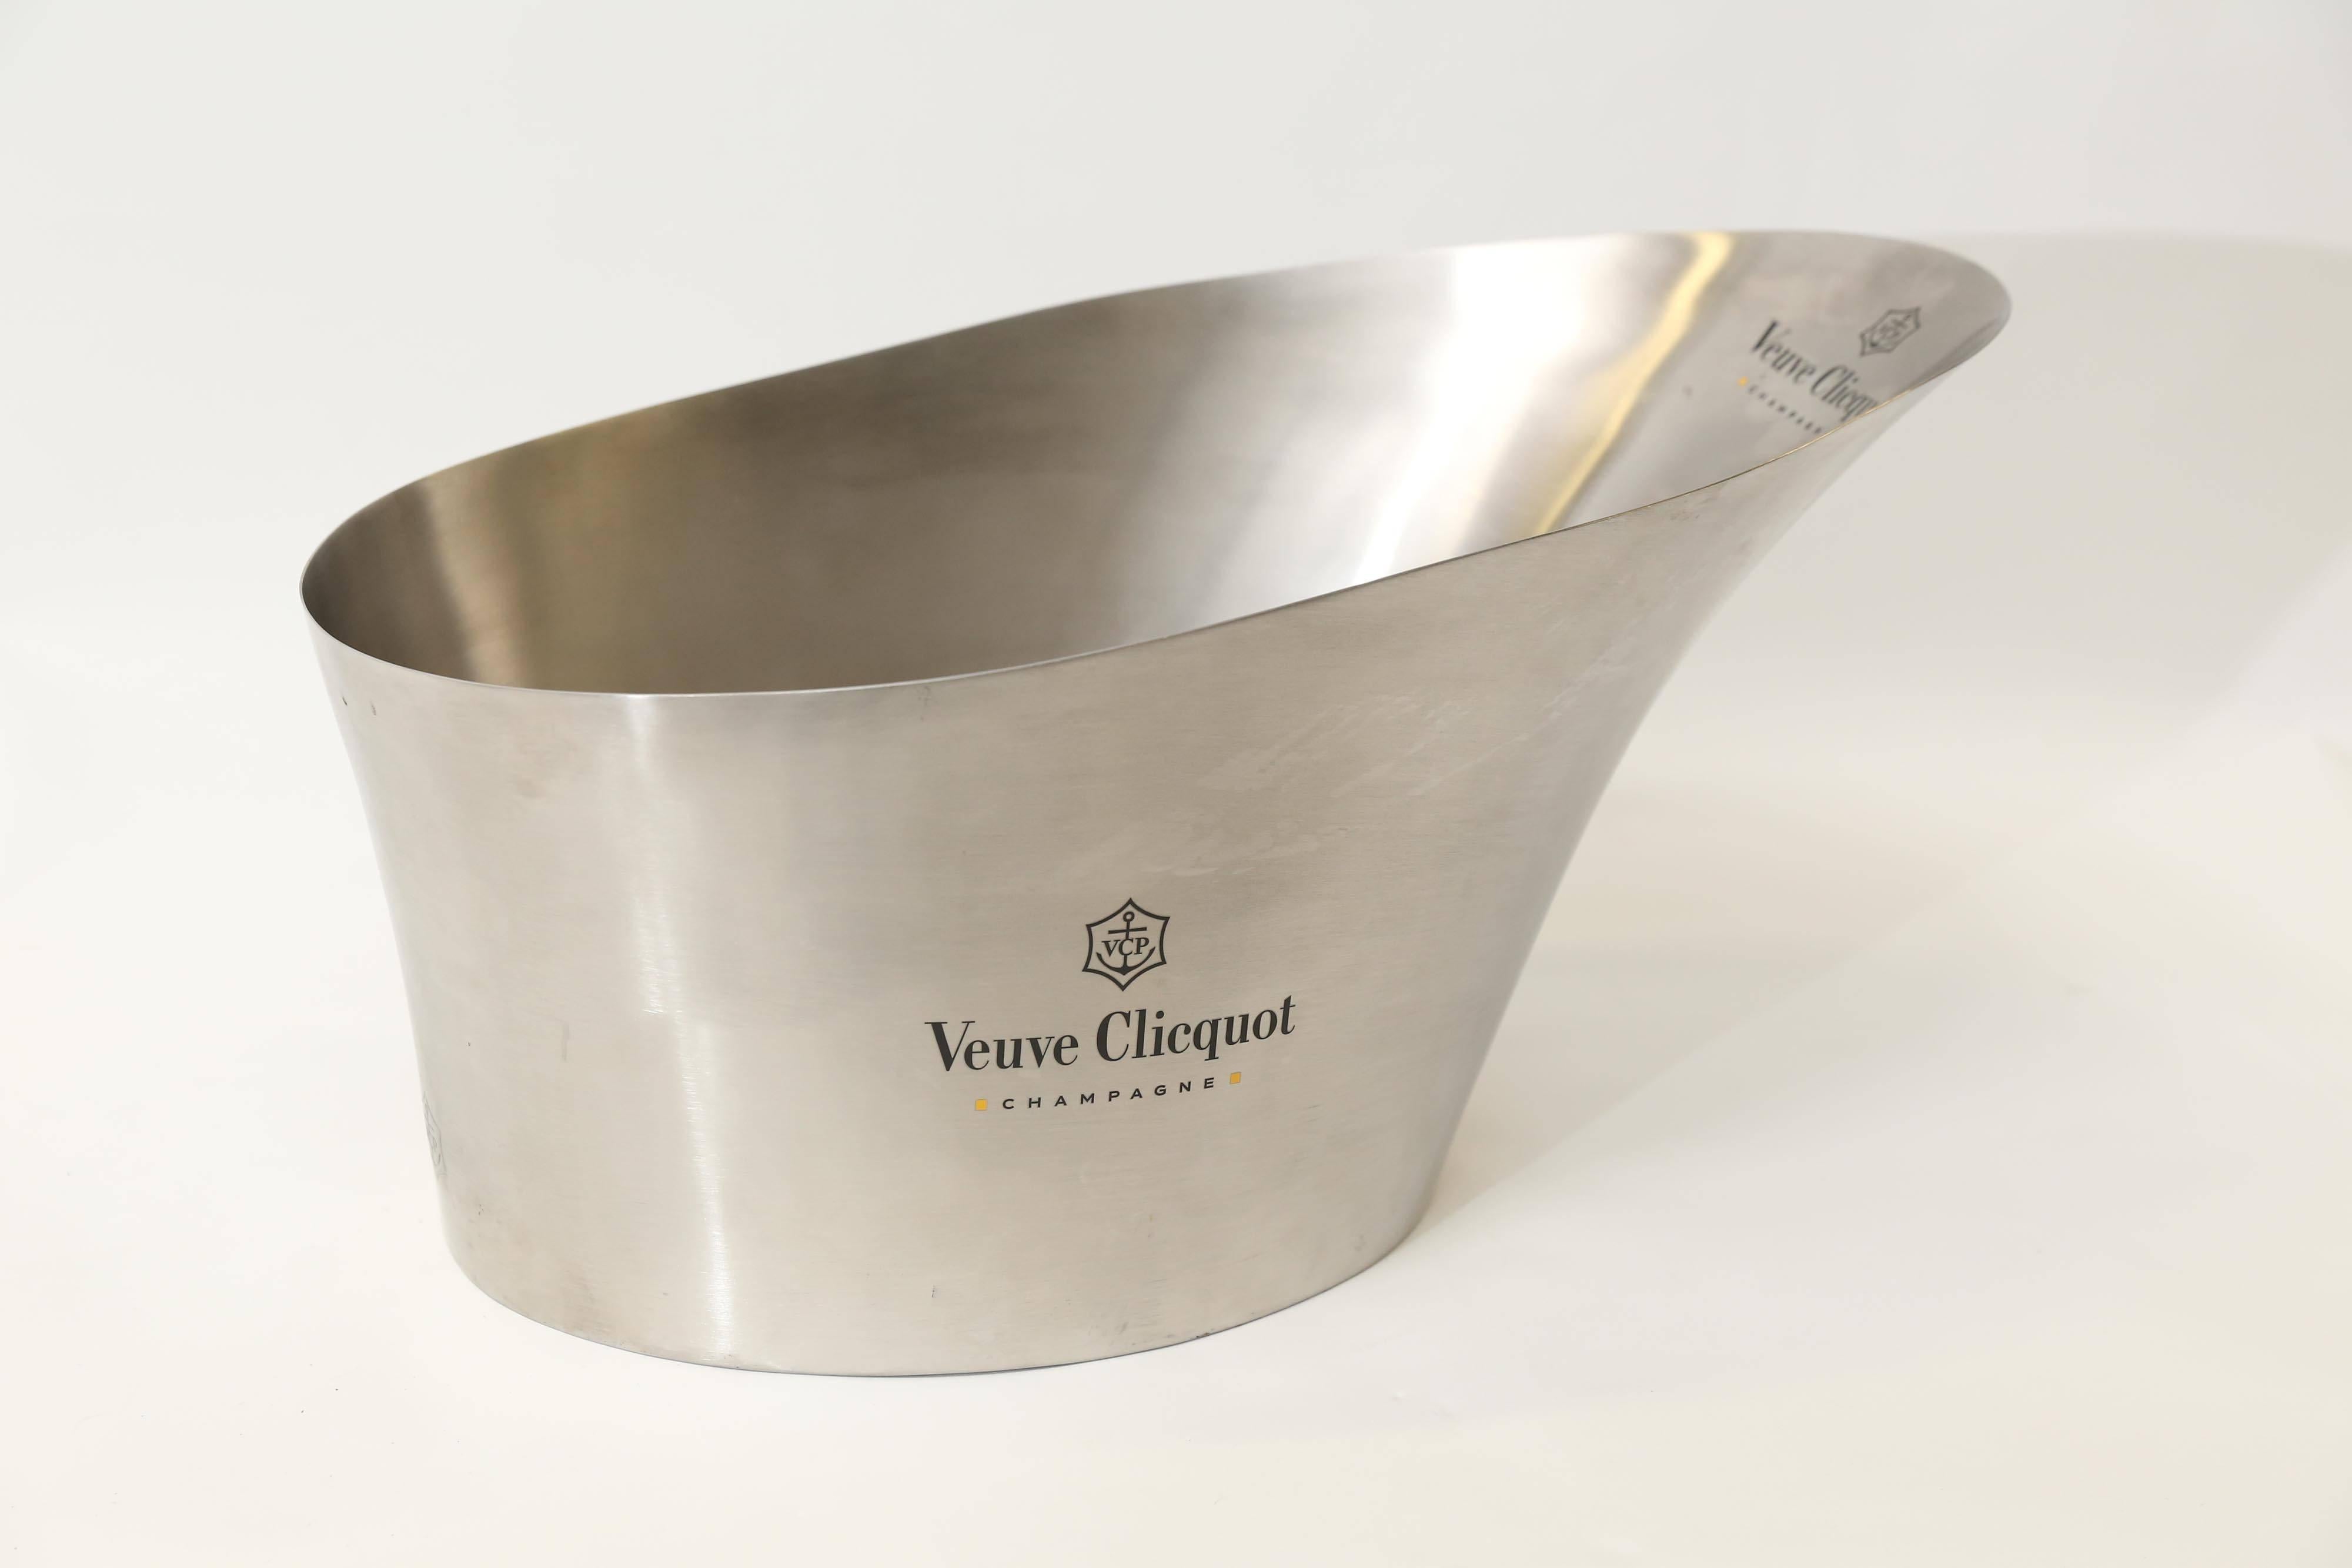 A near pristine example of this beautiful stainless steel double or magnum champagne bucket from the House of Veuve Clicquot. 